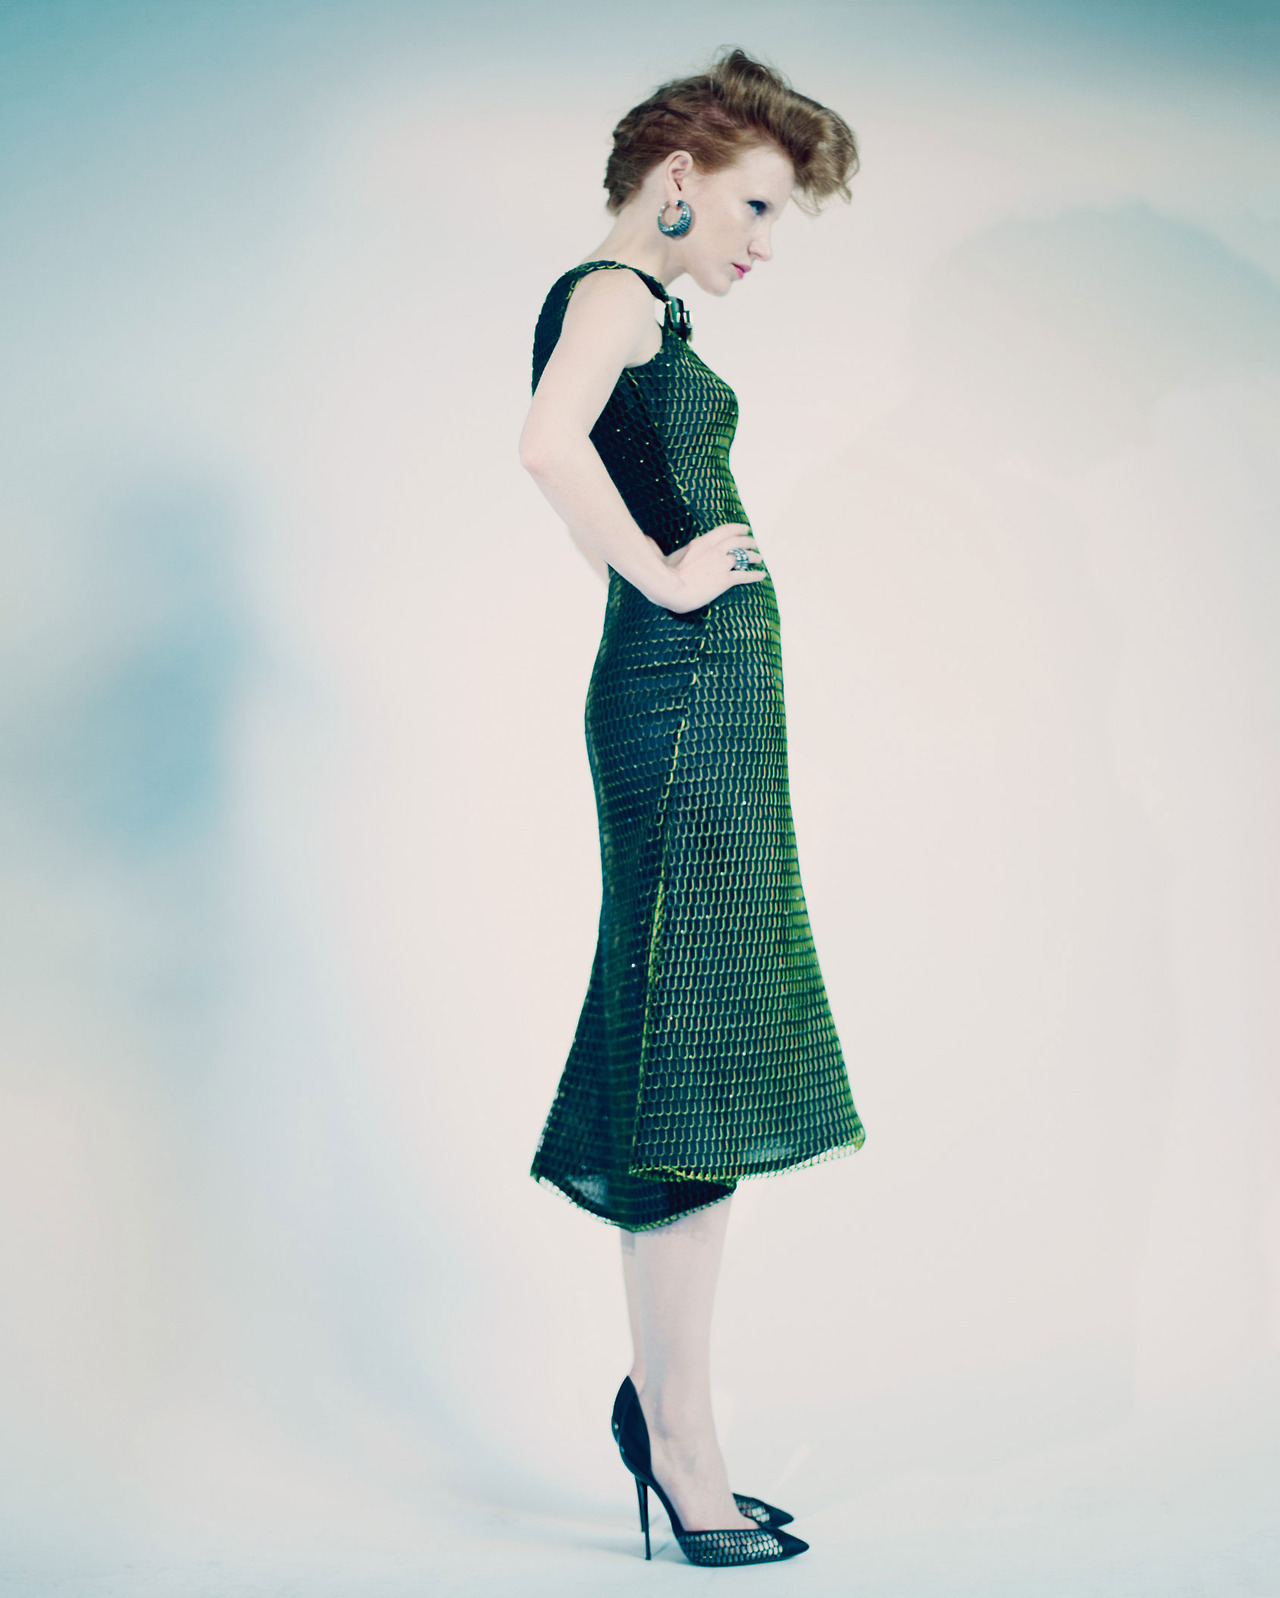 Green with envy<br /> Photograph by Paolo Roversi; styled by Edward Enninful; W magazine May 2012.